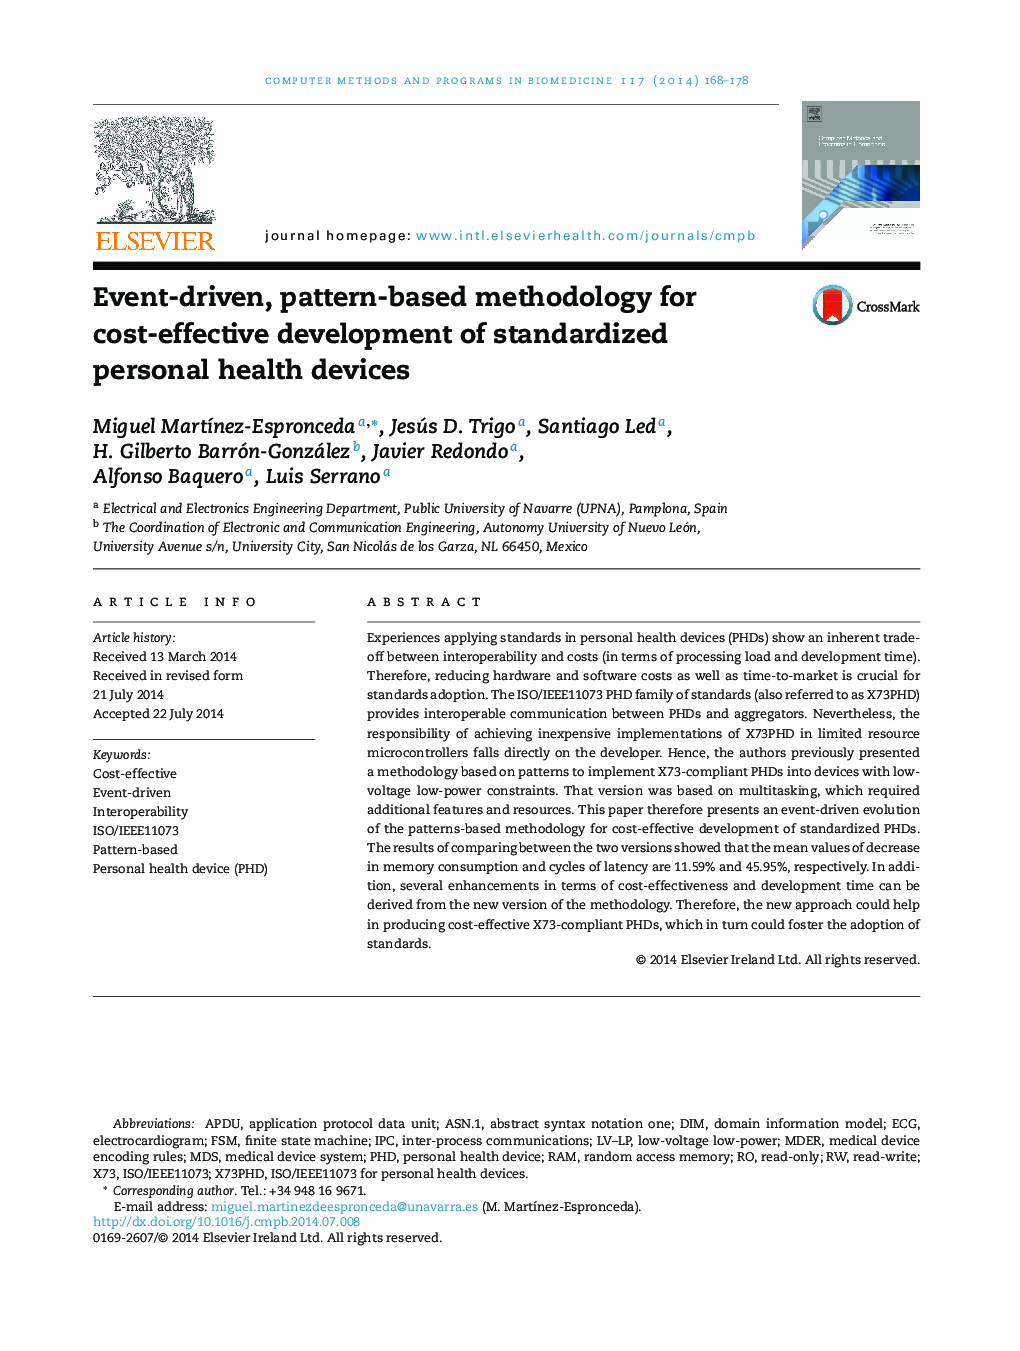 Event-driven, pattern-based methodology for cost-effective development of standardized personal health devices